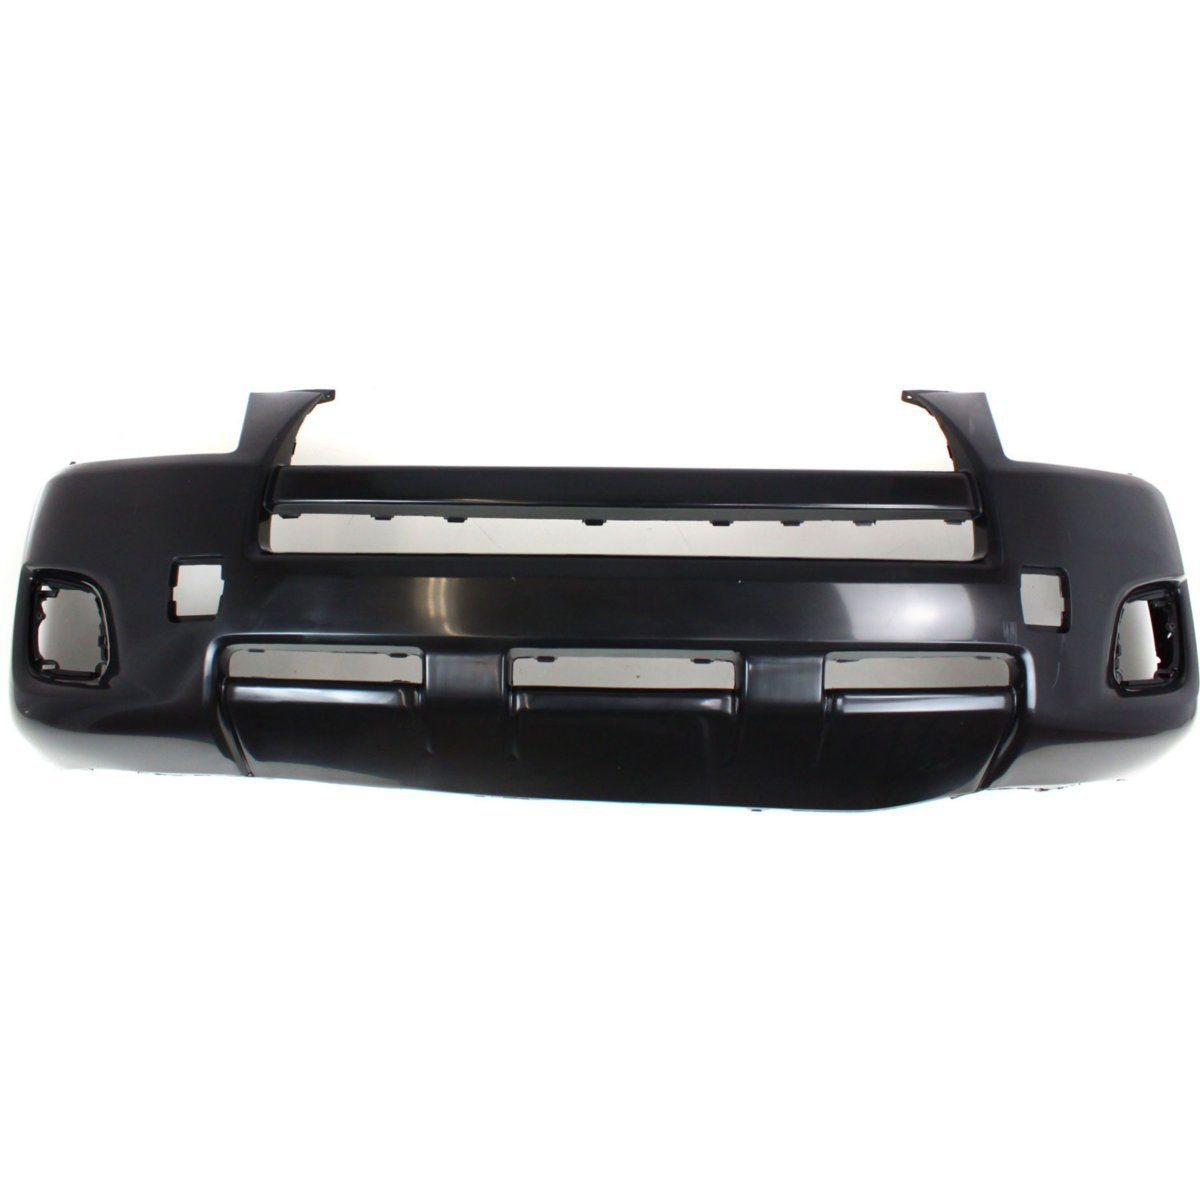 2009-2012 TOYOTA RAV4 Front Bumper Cover Sport Model Painted to Match